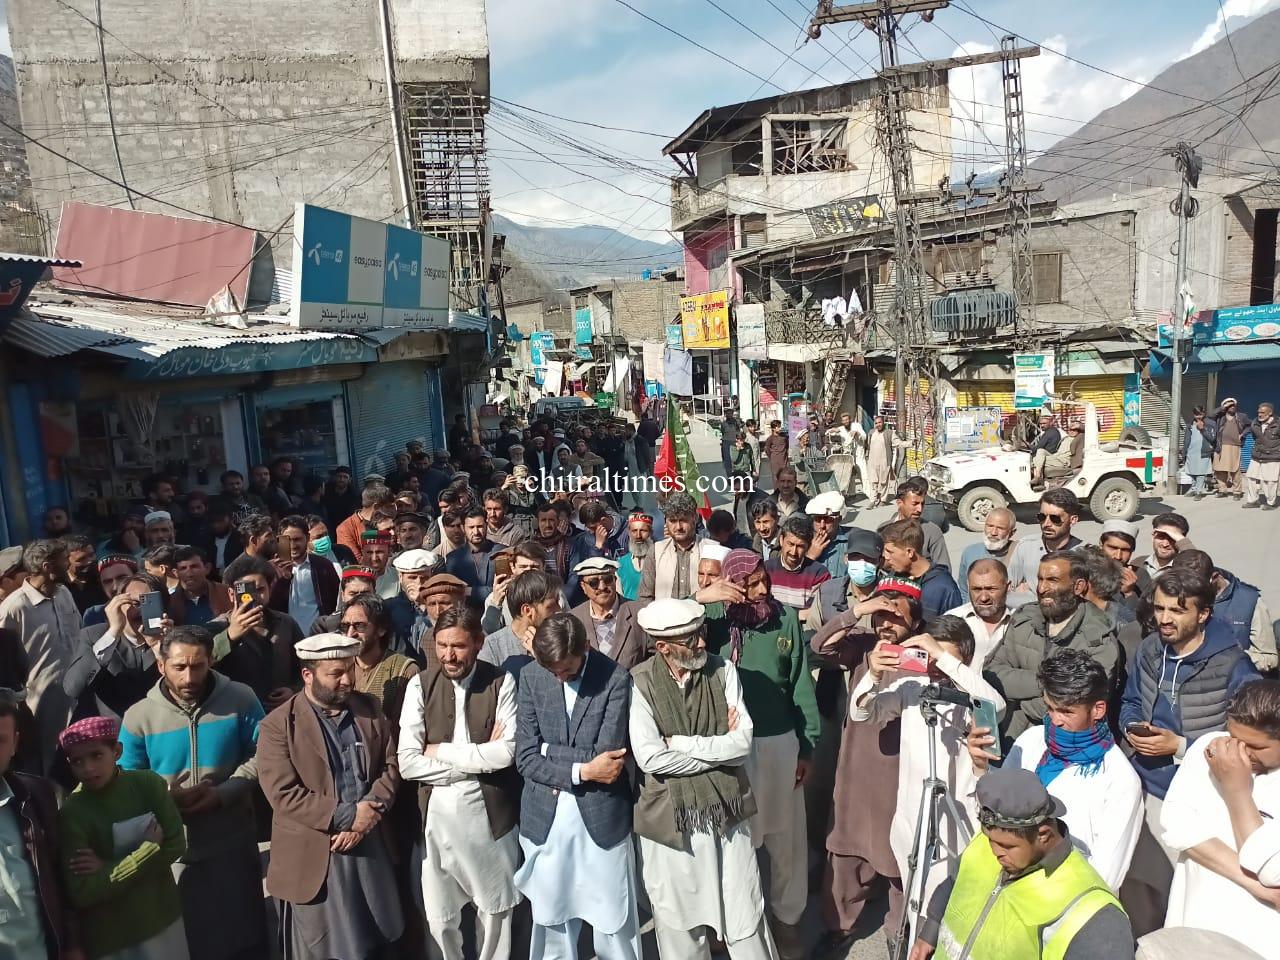 chitraltimes pti protest rally chitral mehter chitral address 5